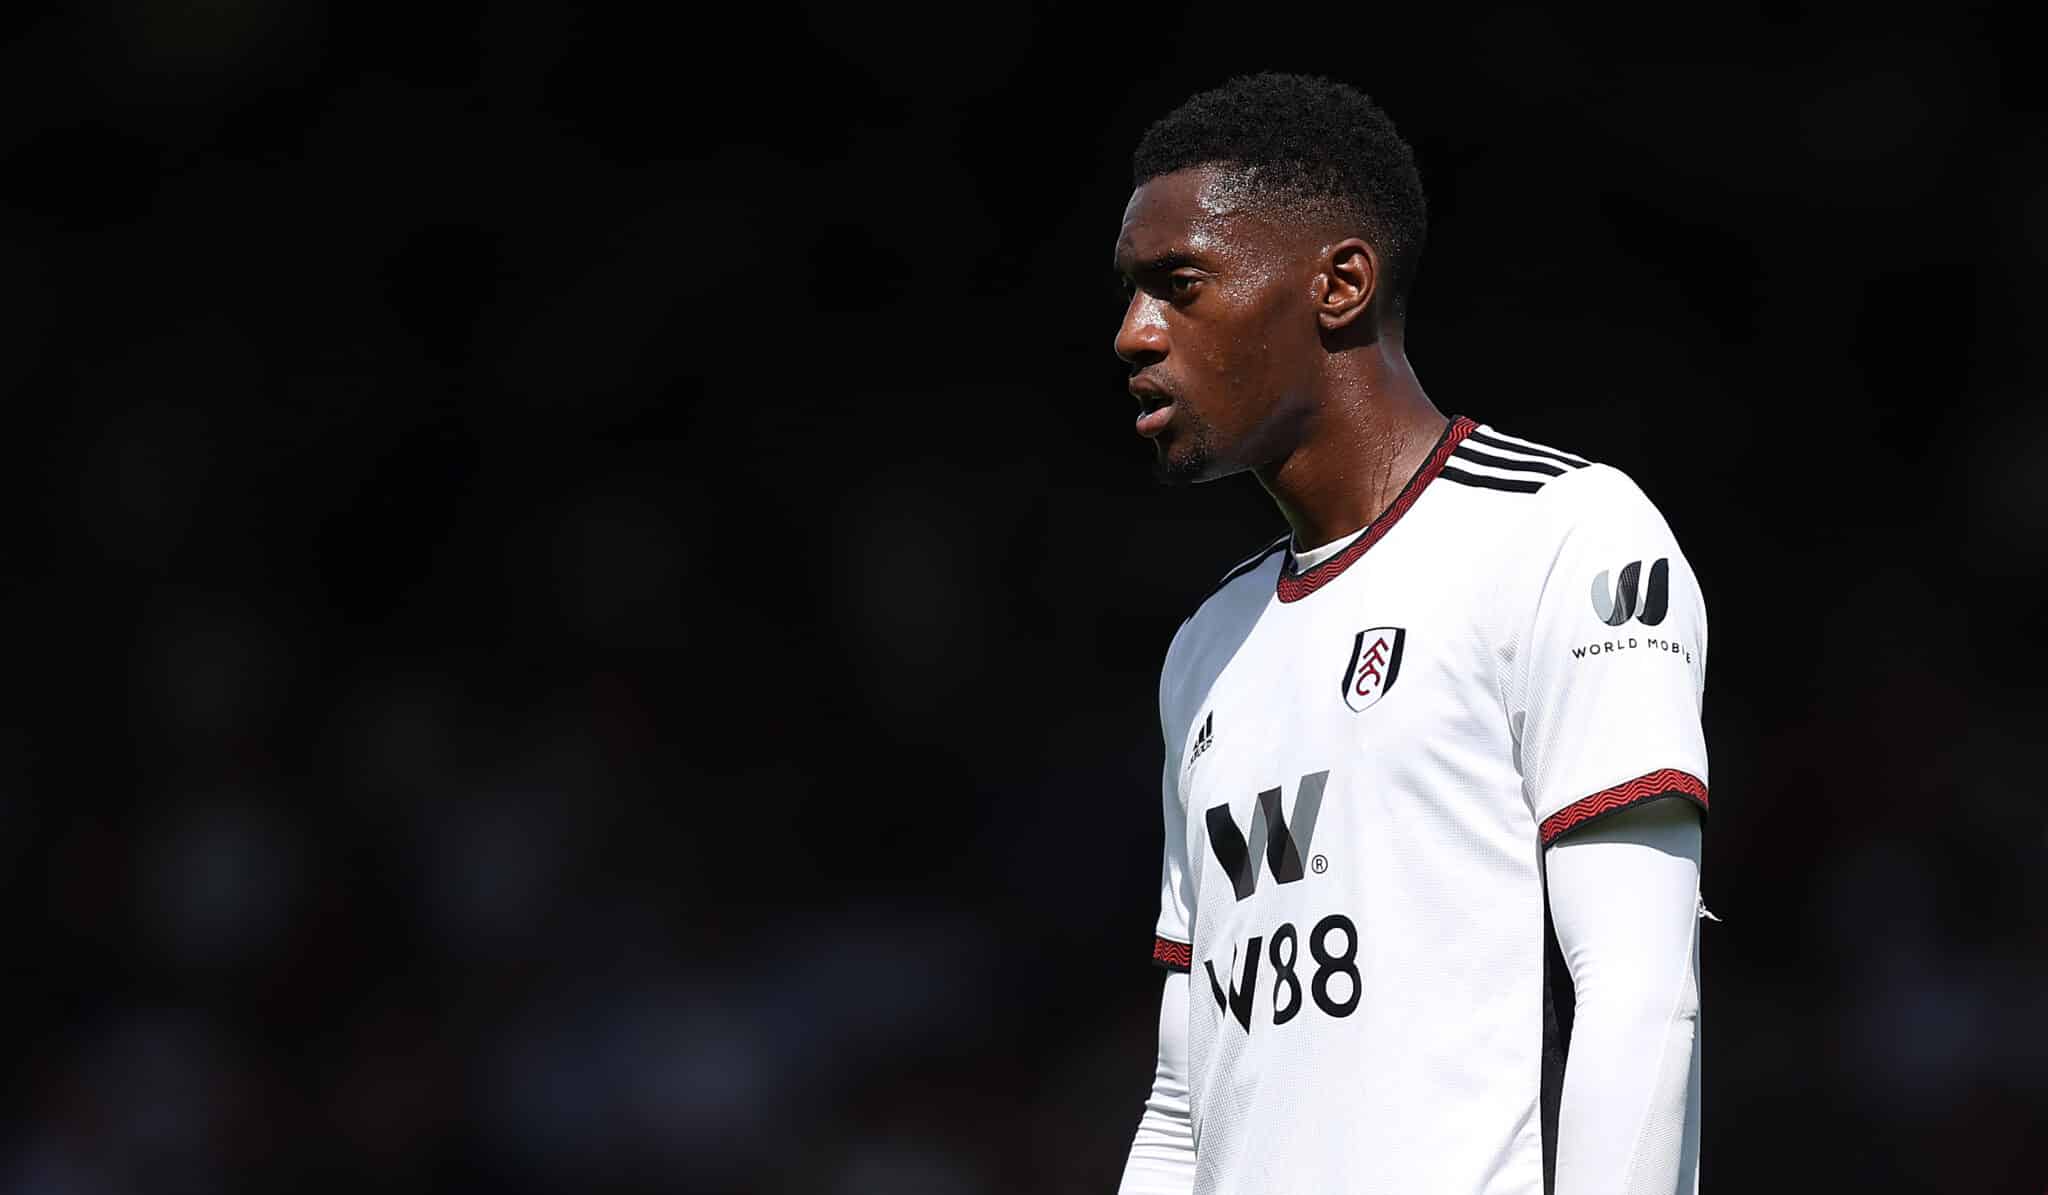 Milan have added a new name to the shortlist to shore up their defense, Fulham’s Tosin Adarabioyo. They opened talks with his camp.